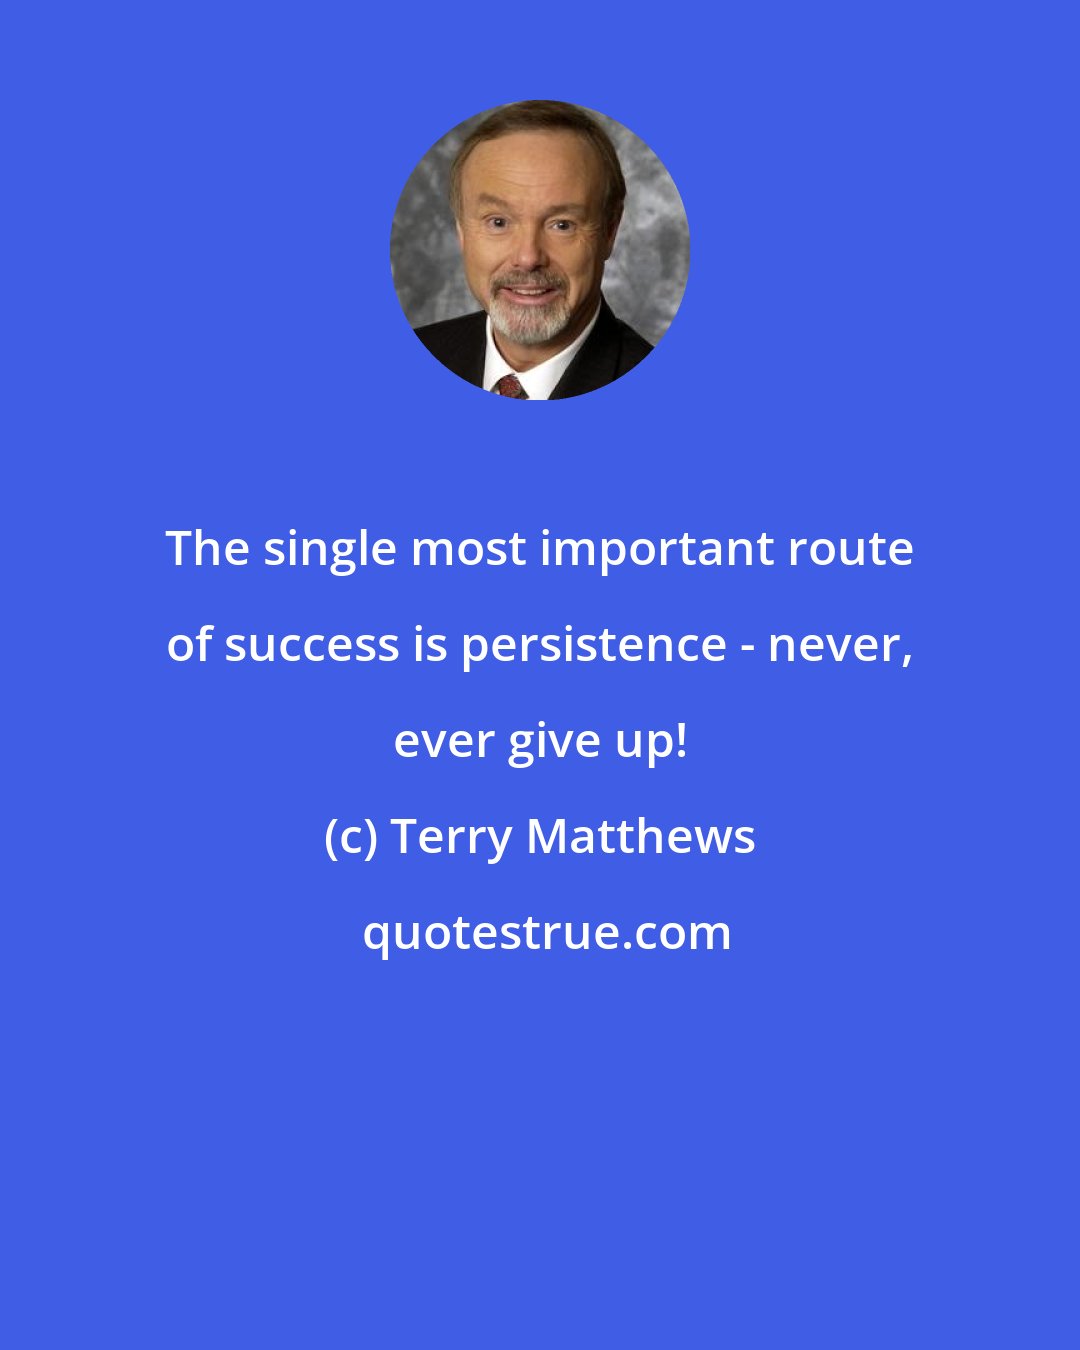 Terry Matthews: The single most important route of success is persistence - never, ever give up!